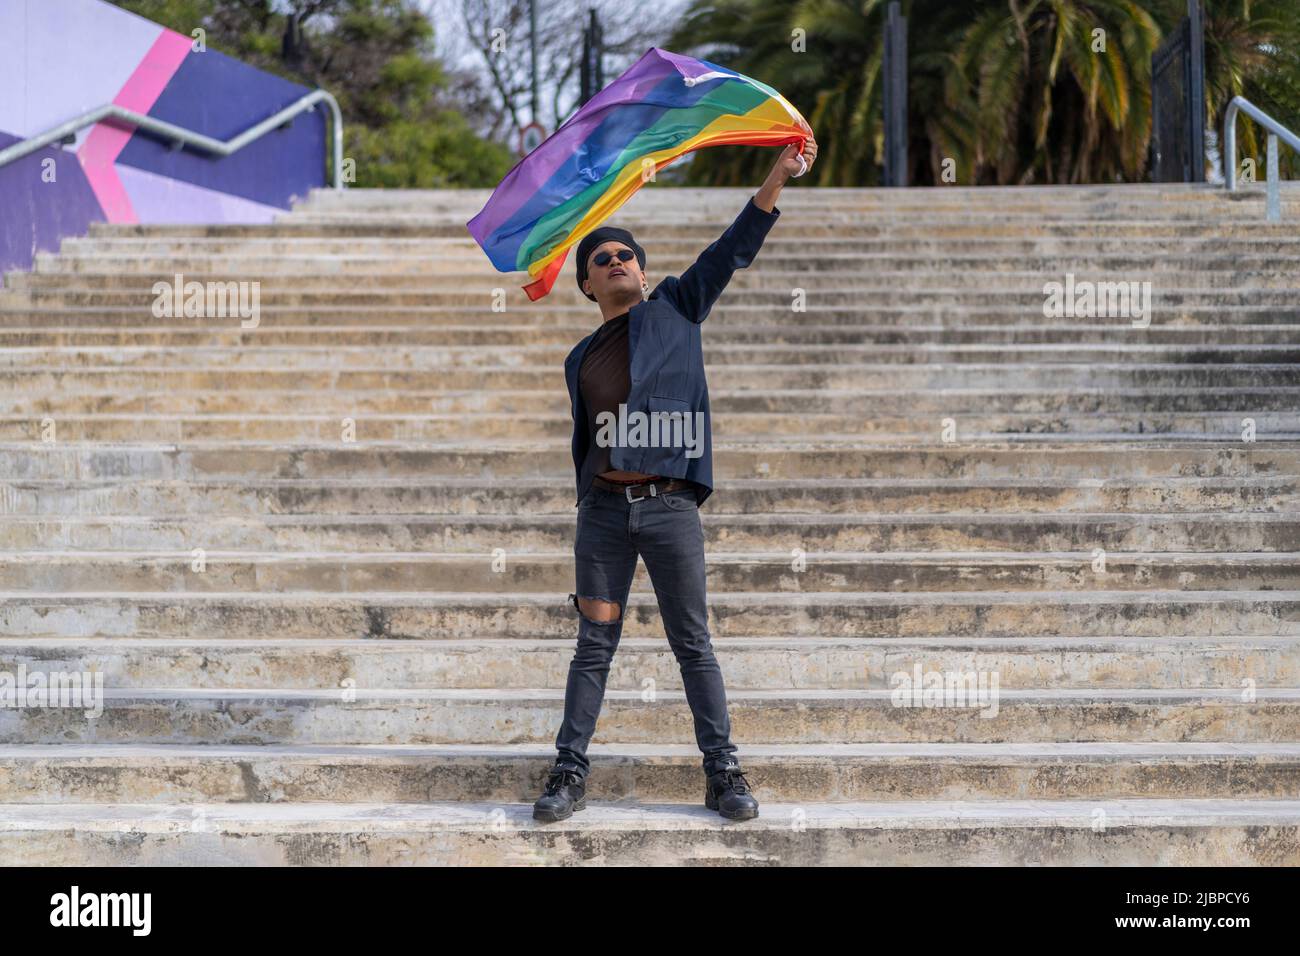 Lating gay male whit make-up on wearing fashionable hat holding lgbt flag. Concept of freedom and tolerance Stock Photo